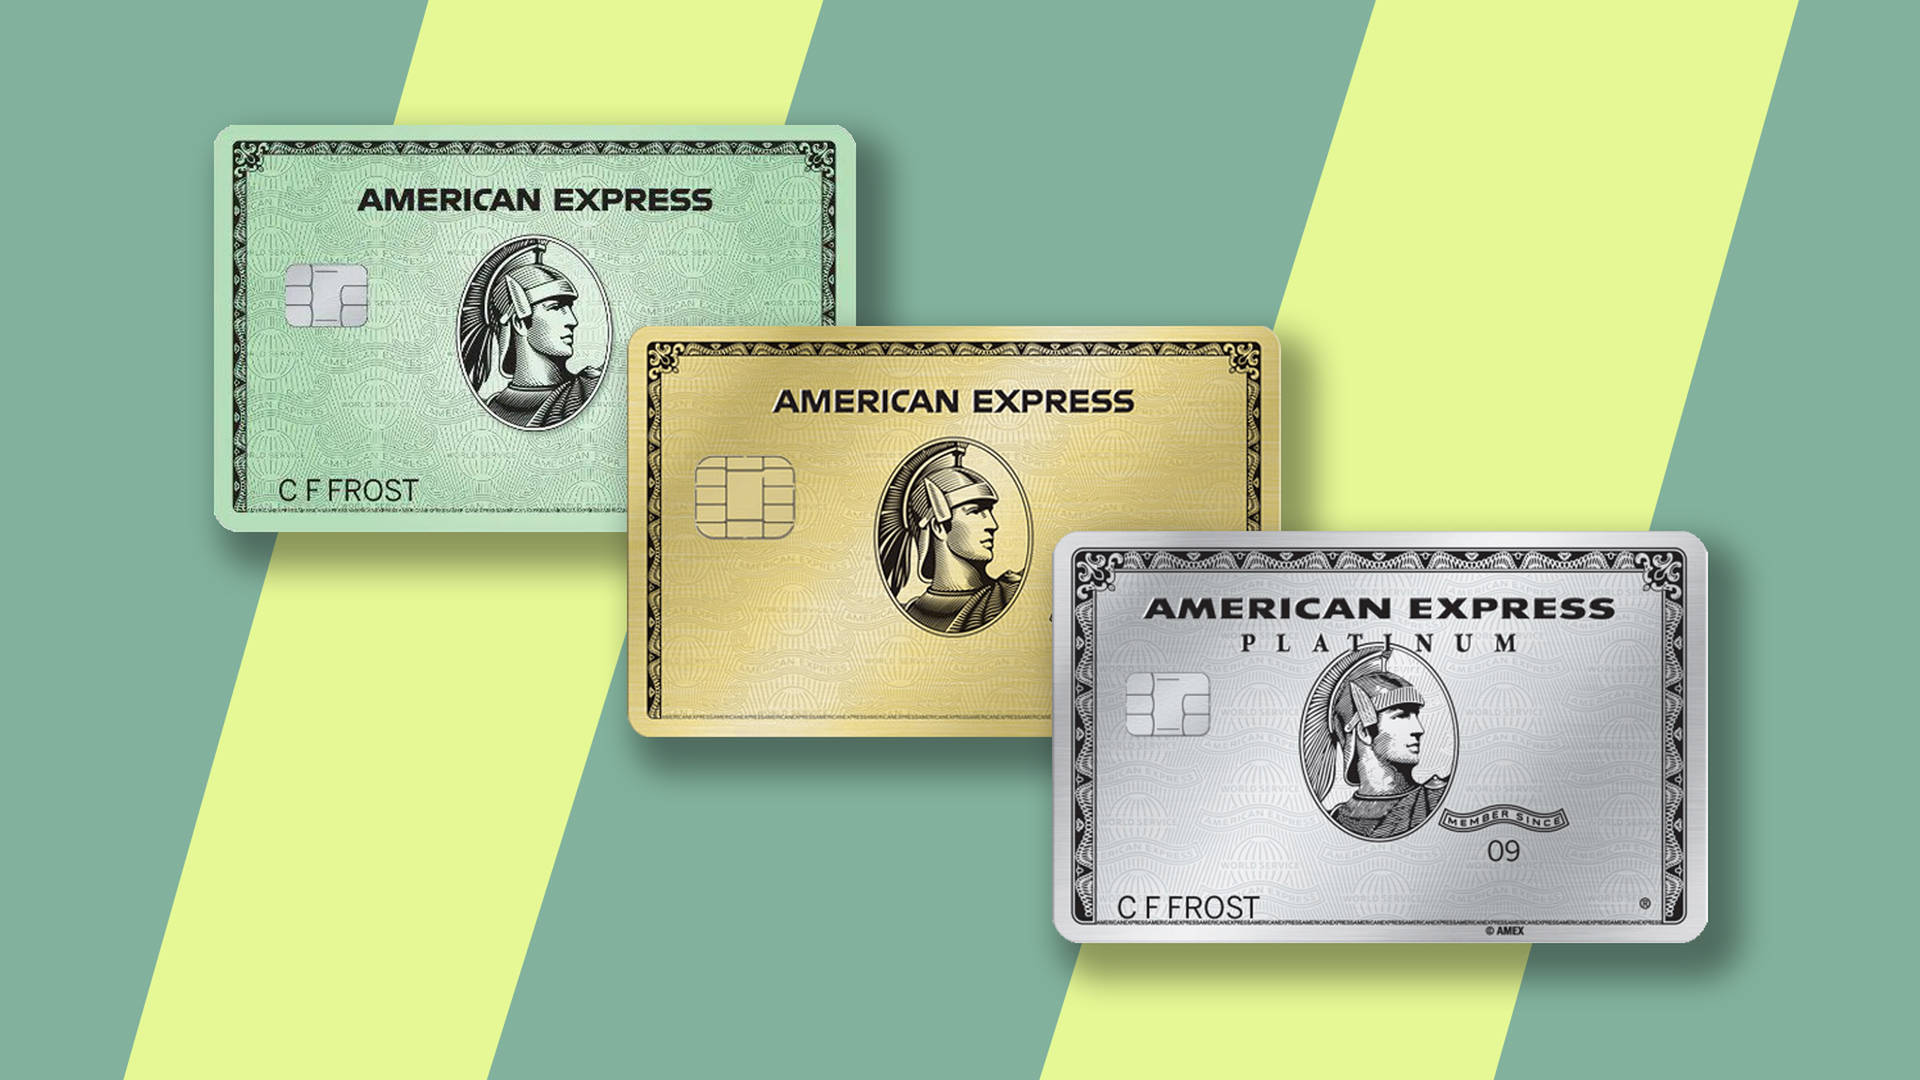 American Express Credit Cards Background